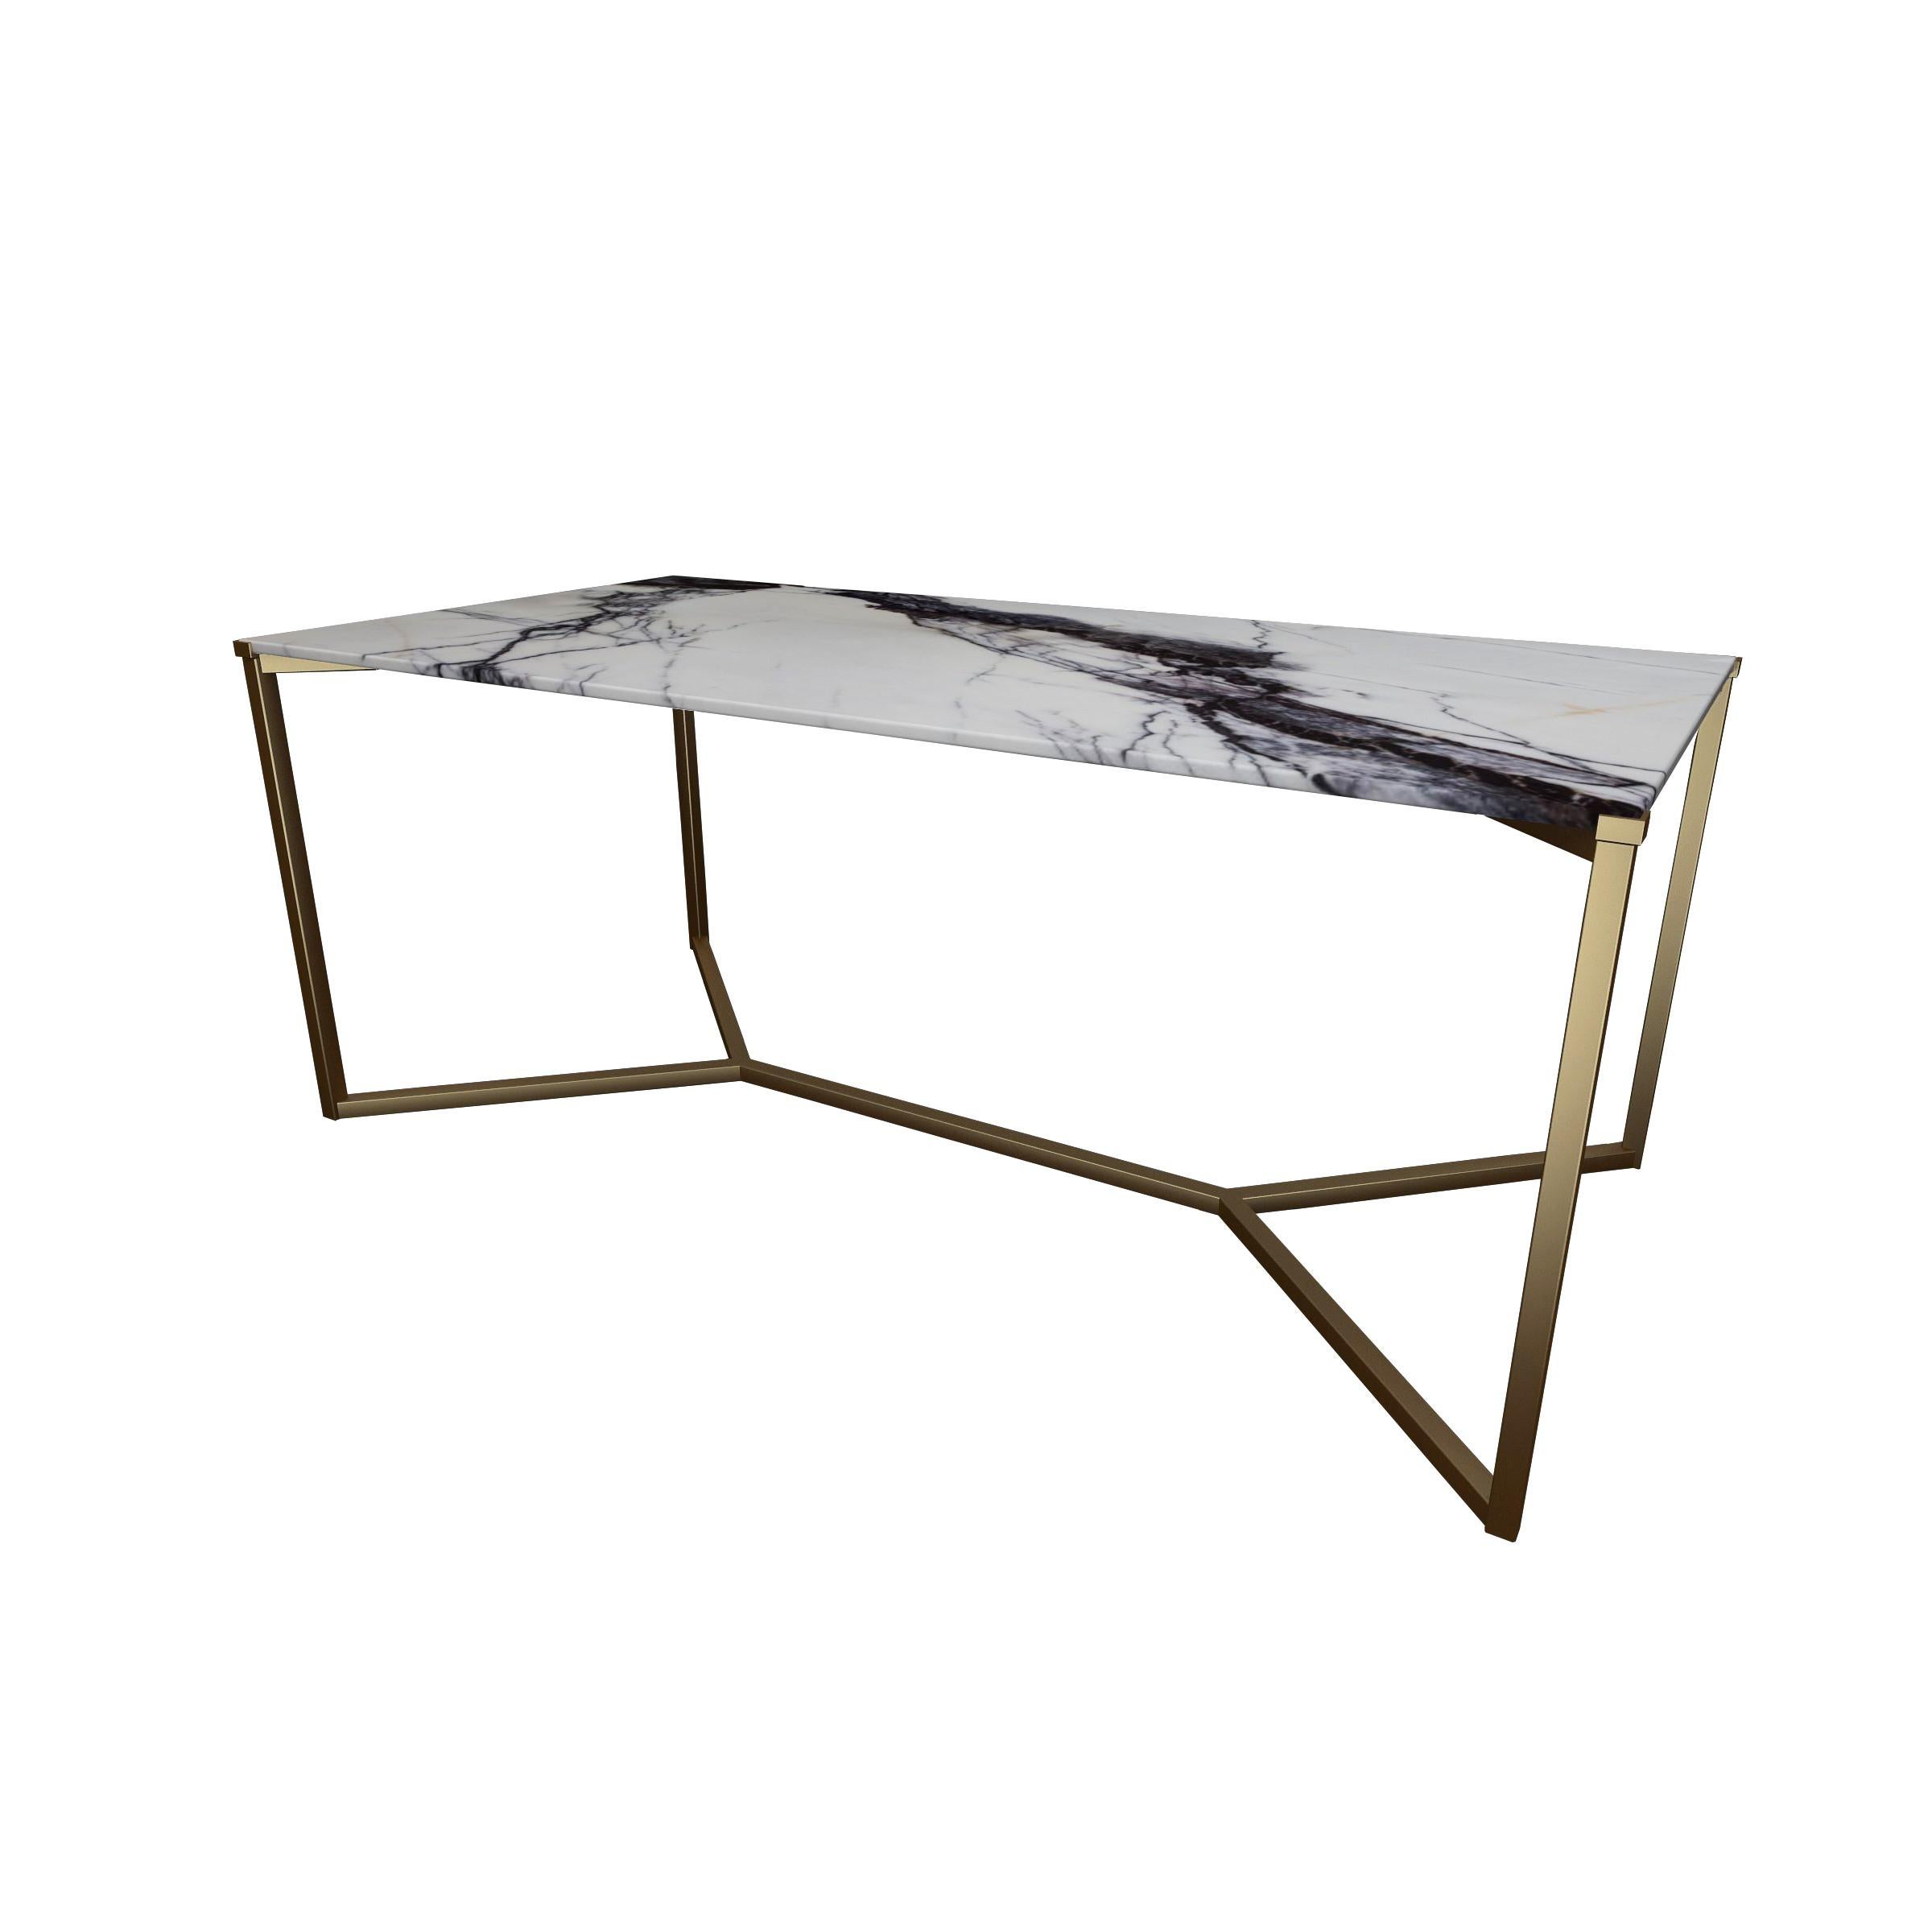 Chinese NORDST TEDDY Dining Table, Italian Black Eagle Marble, Danish Modern Design, New For Sale